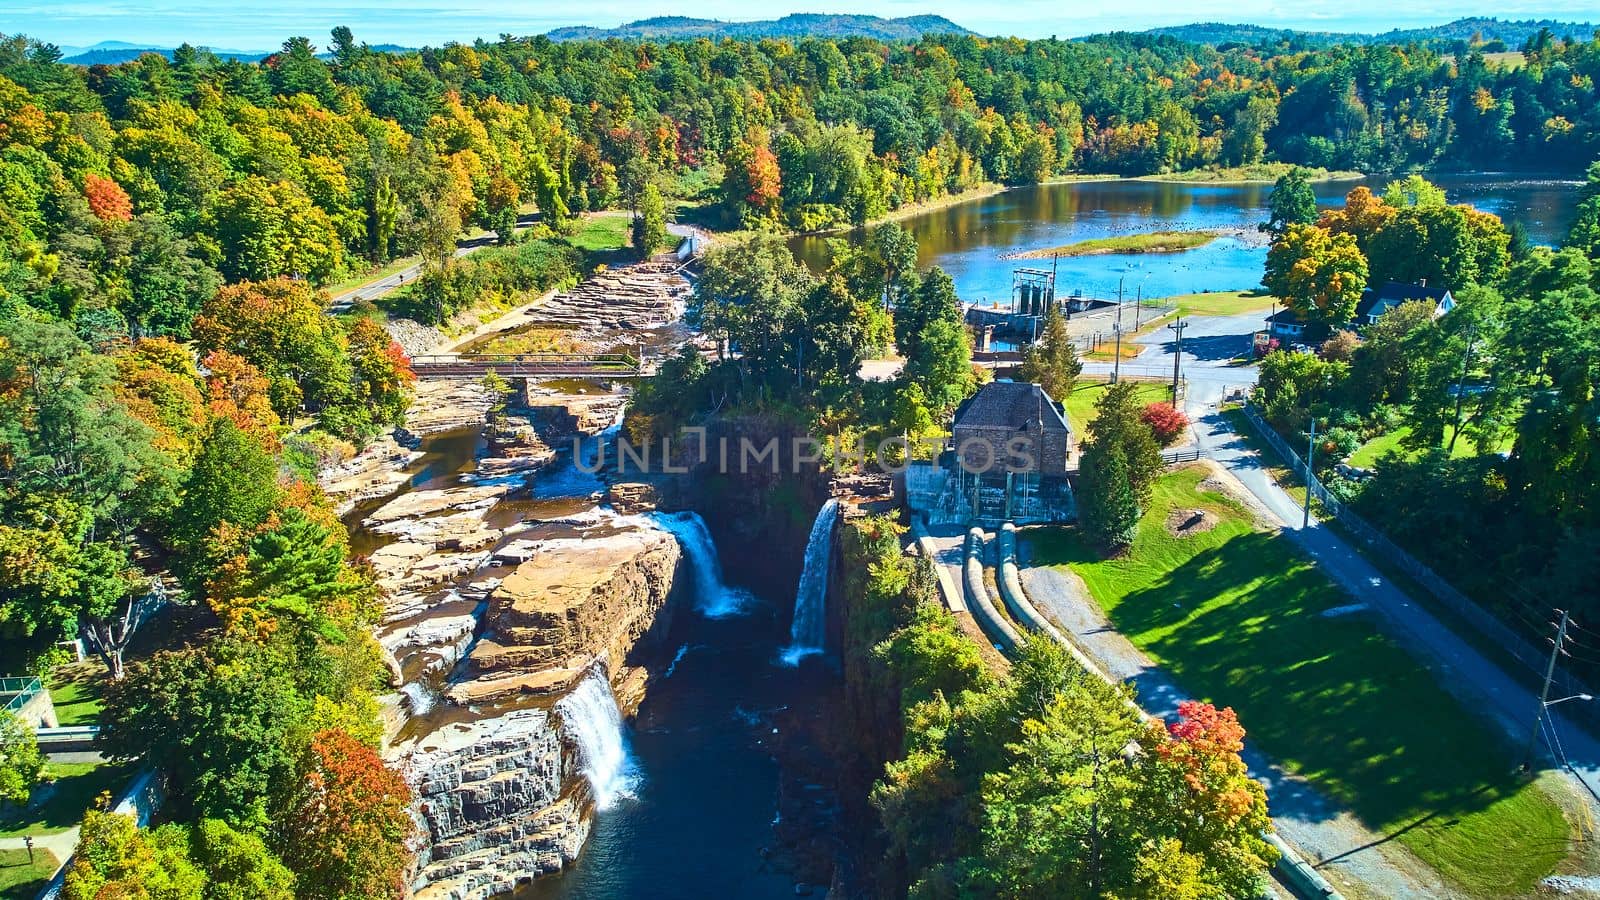 Large canyon with many waterfalls, Hydroelectric power plant, and nearby lake from drone by njproductions